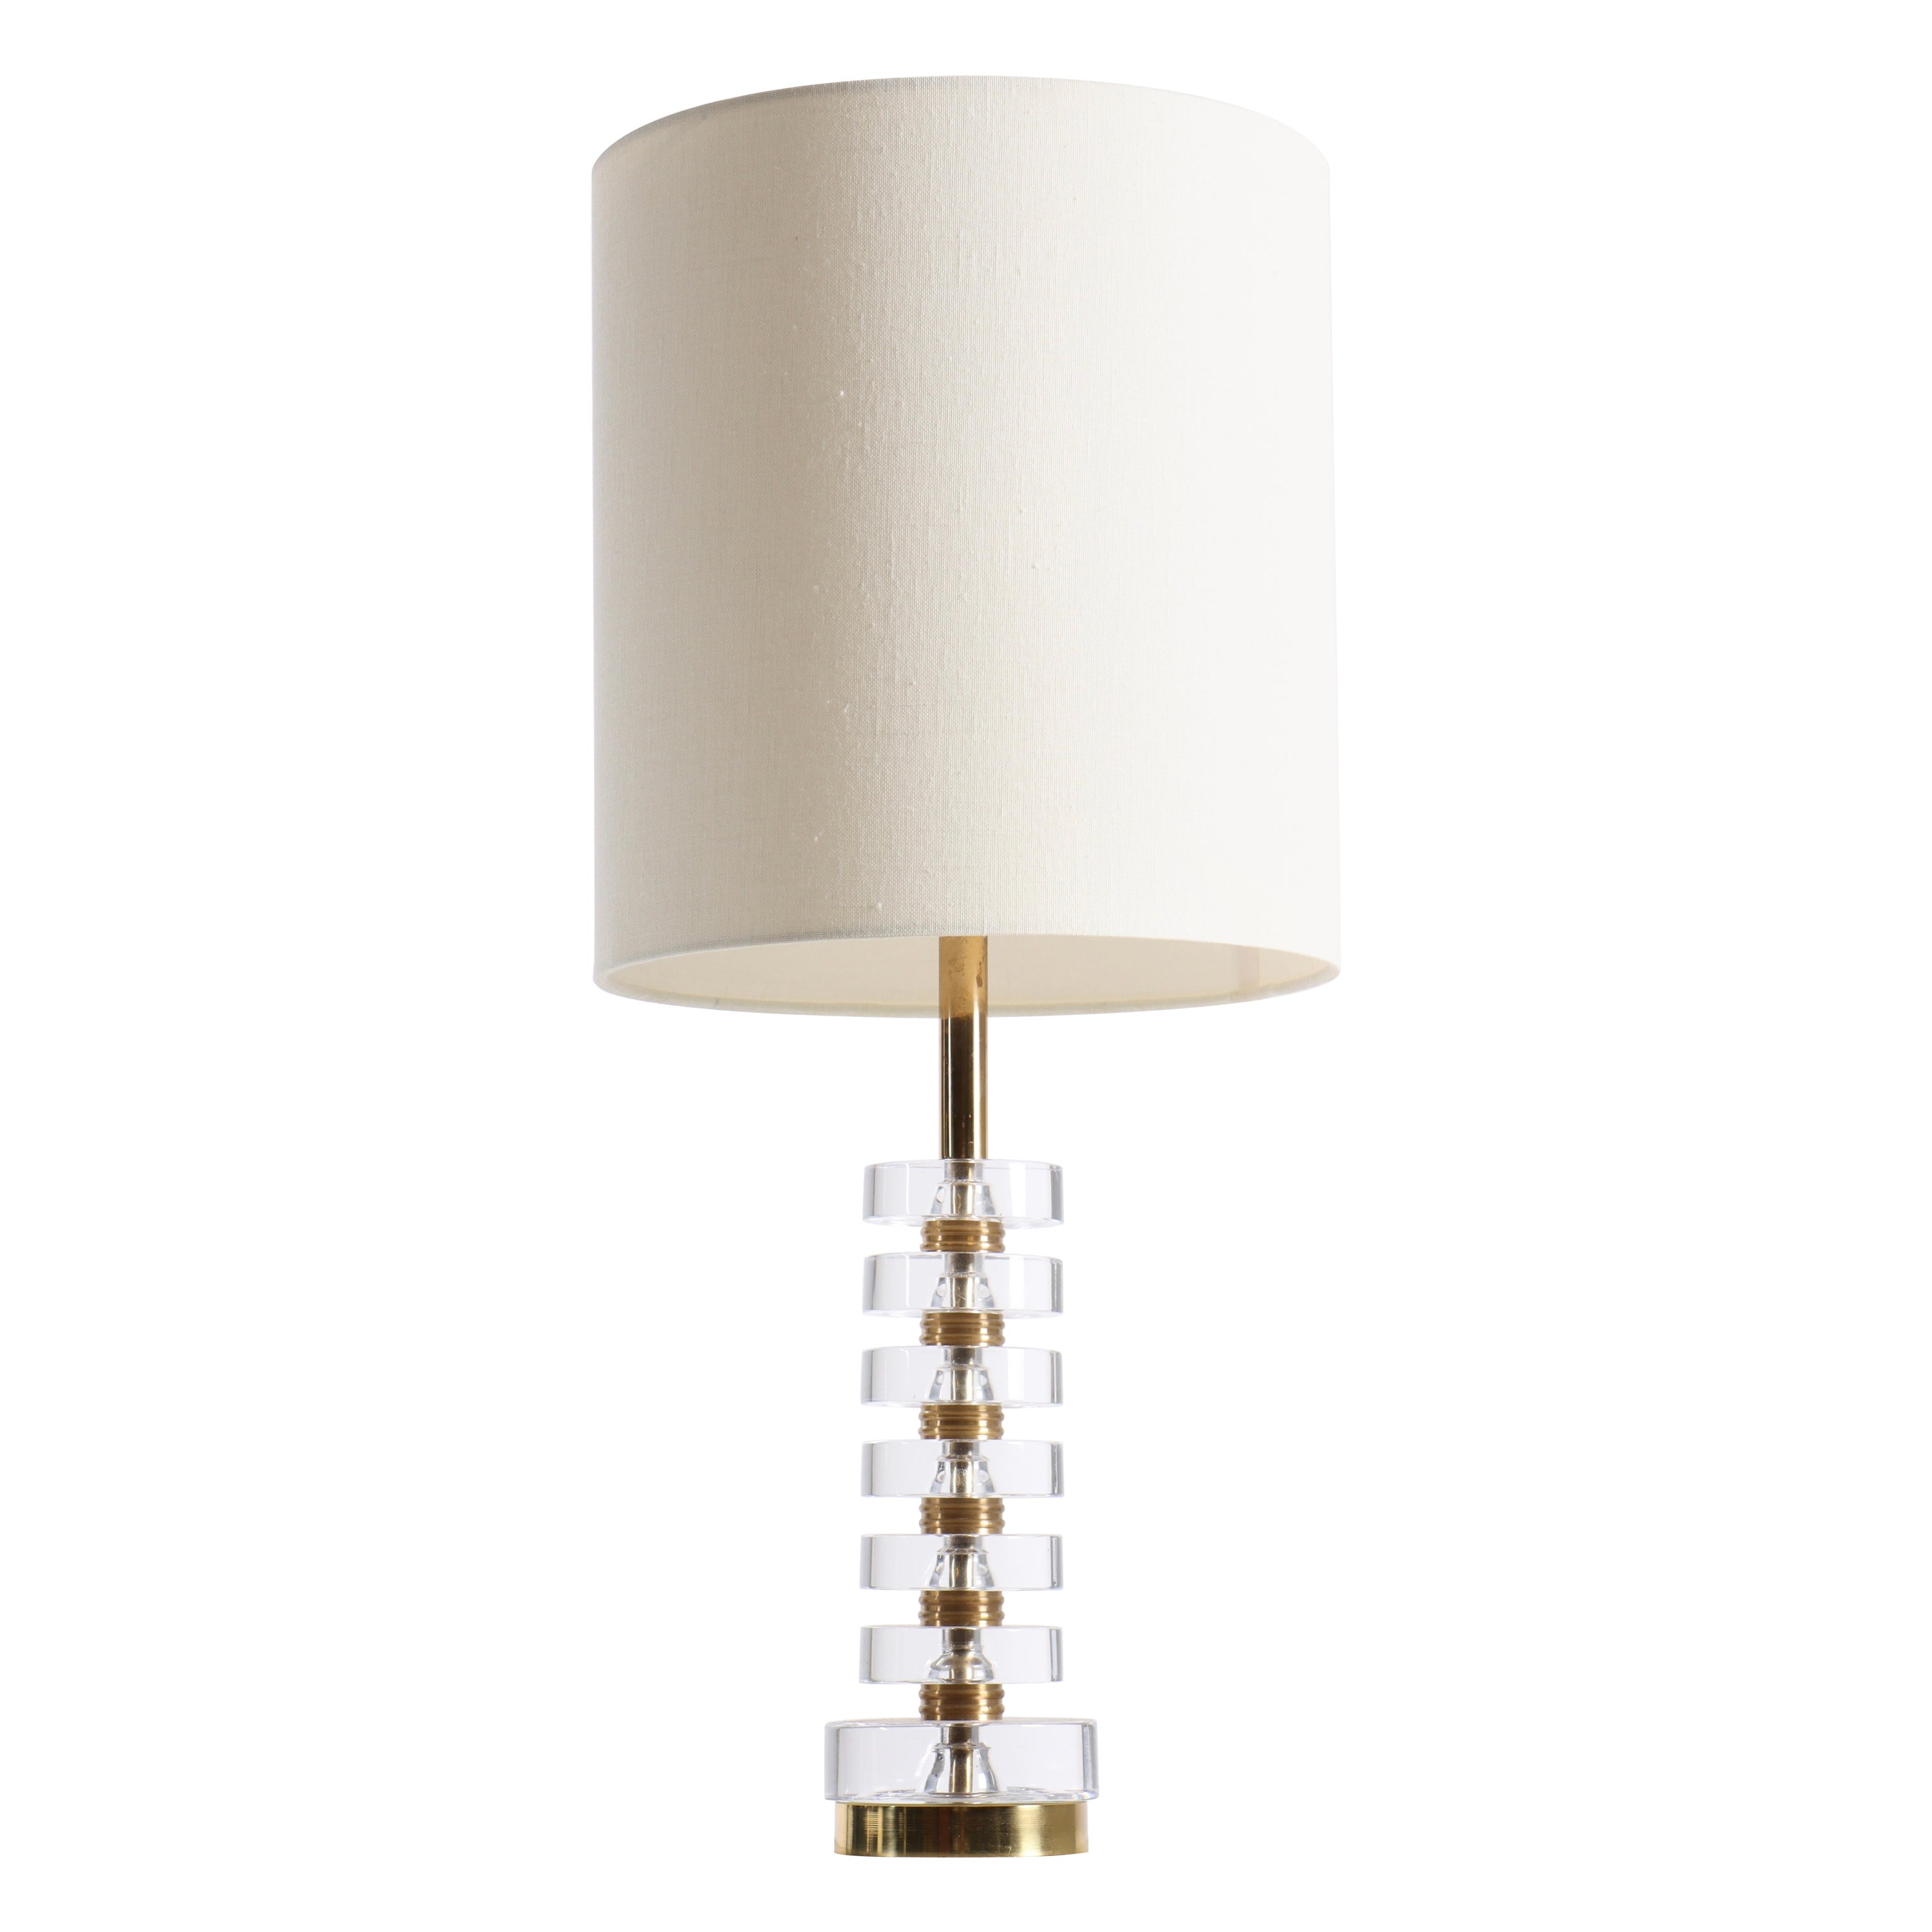 Midcentury Table Lamp Designed by Carl Fagerlund for Orrefors Glass, 1950s For Sale